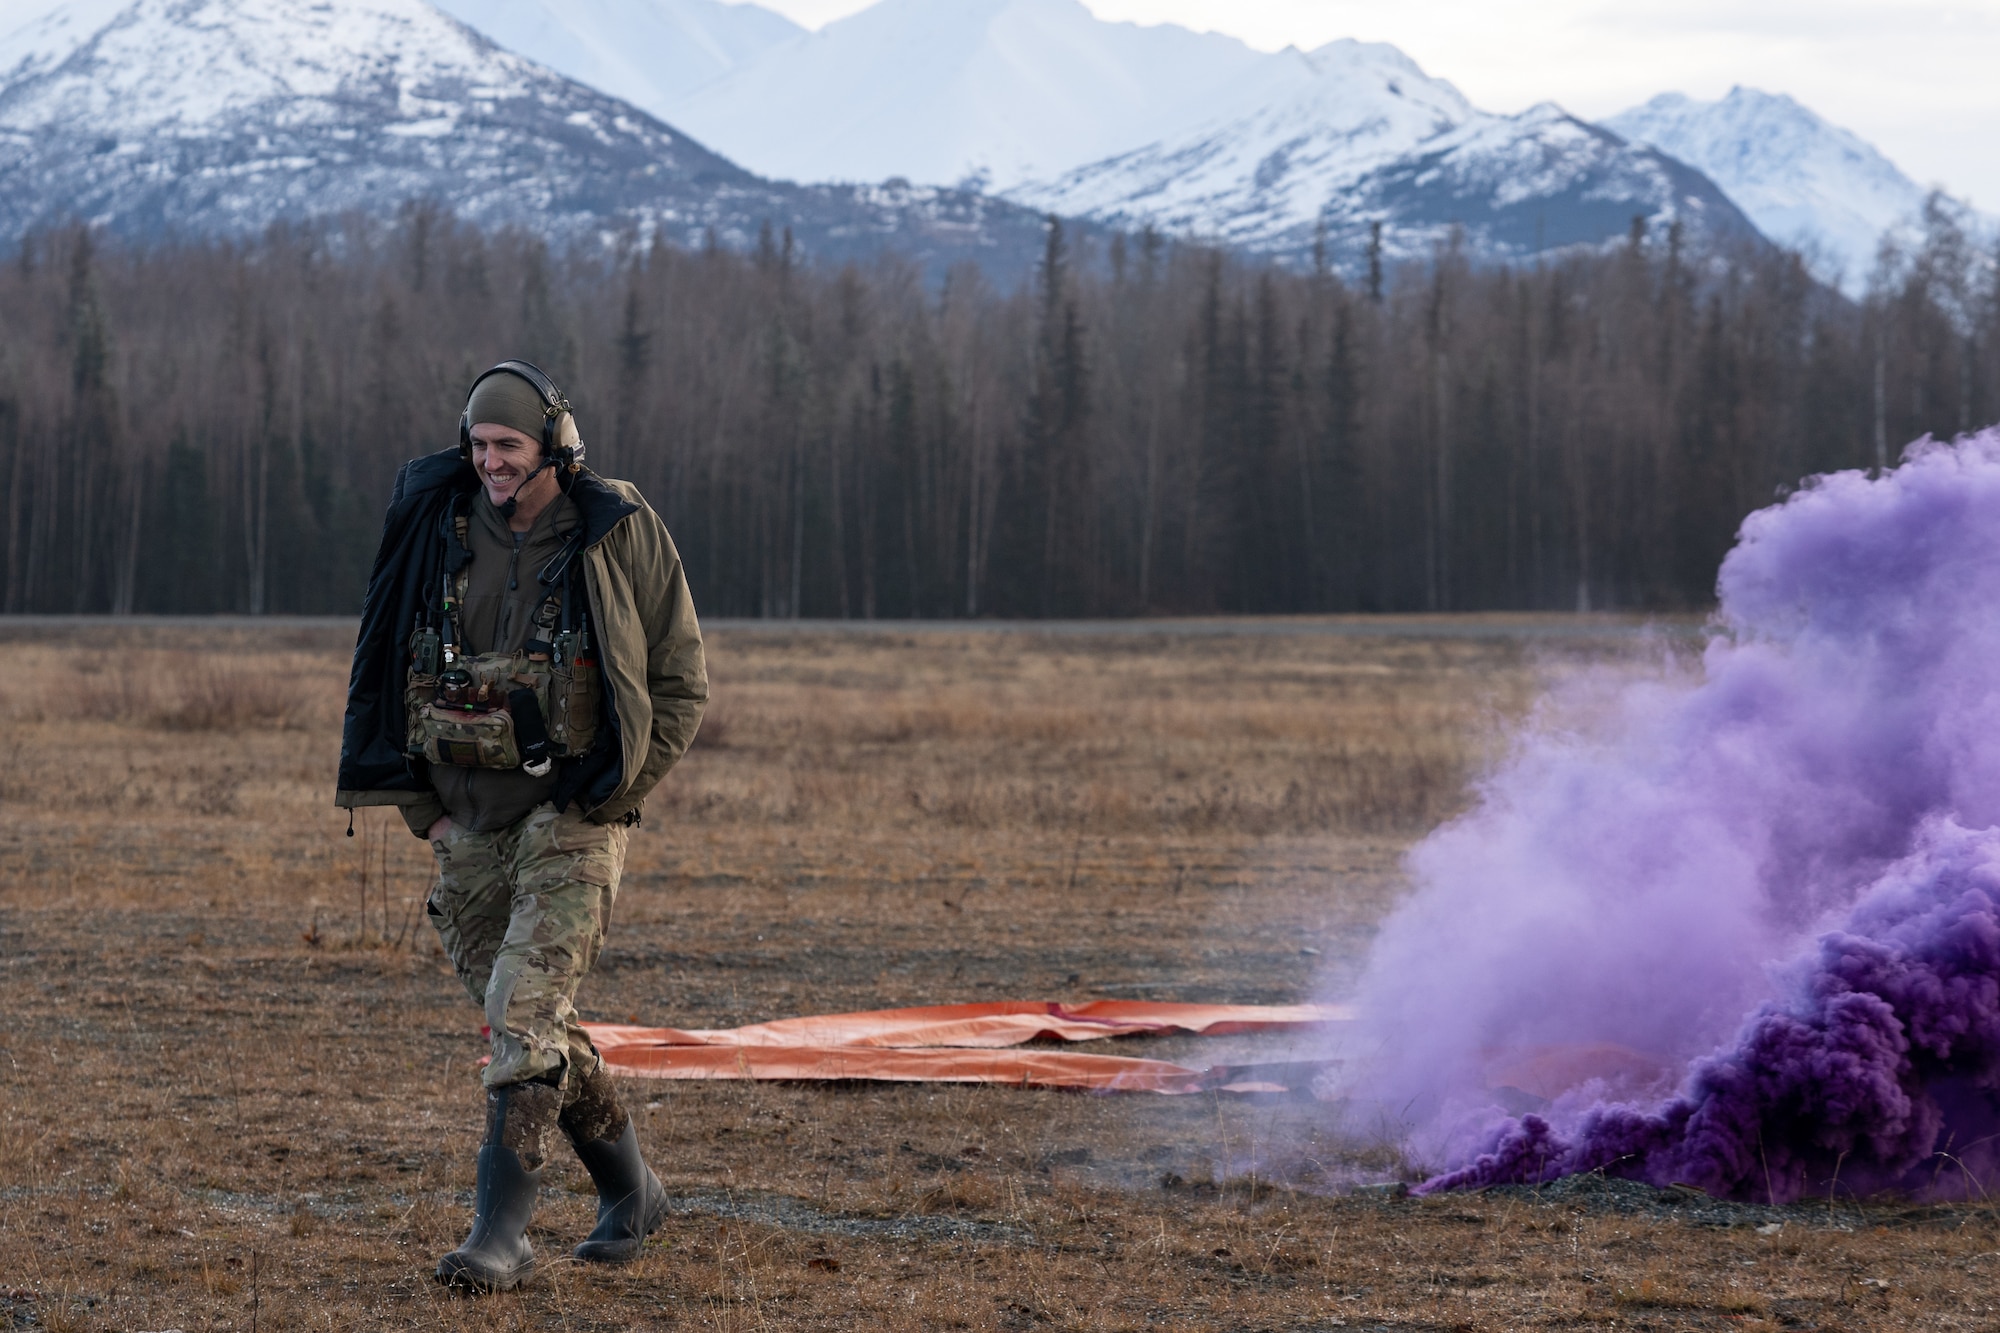 U.S. Air Force Staff Sgt. Tanner Boyer, a combat controller assigned to the 212th Rescue Squadron, Alaska Air National Guard, returns from the drop zone after throwing a smoke grenade during a training event at Joint Base Elmendorf-Richardson.